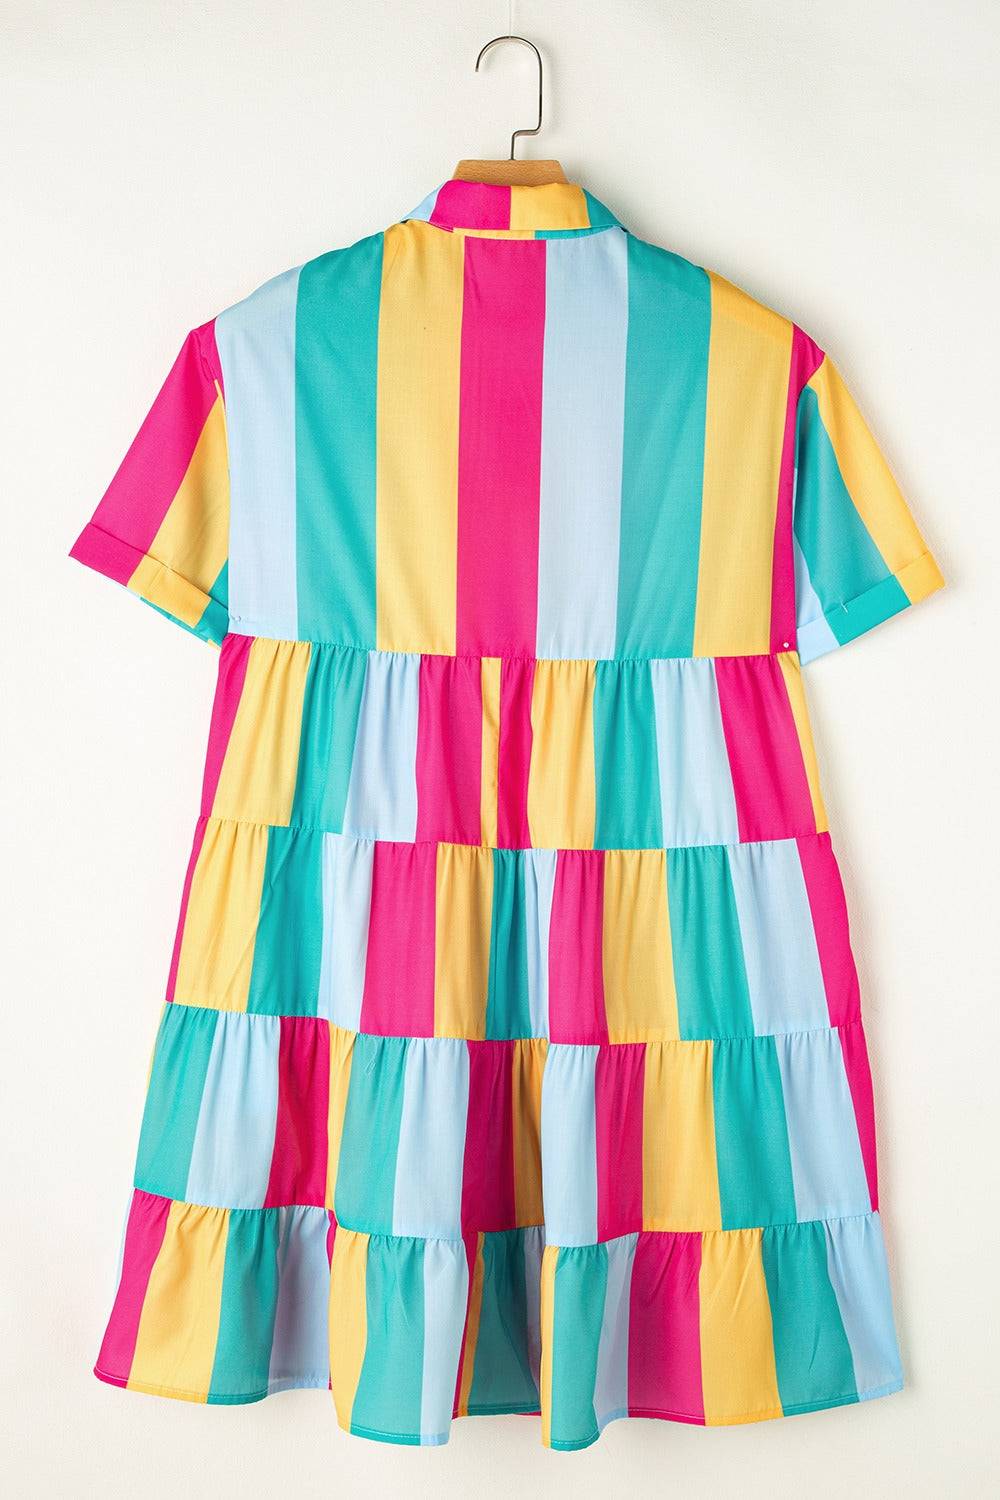 a colorful dress hanging on a hanger